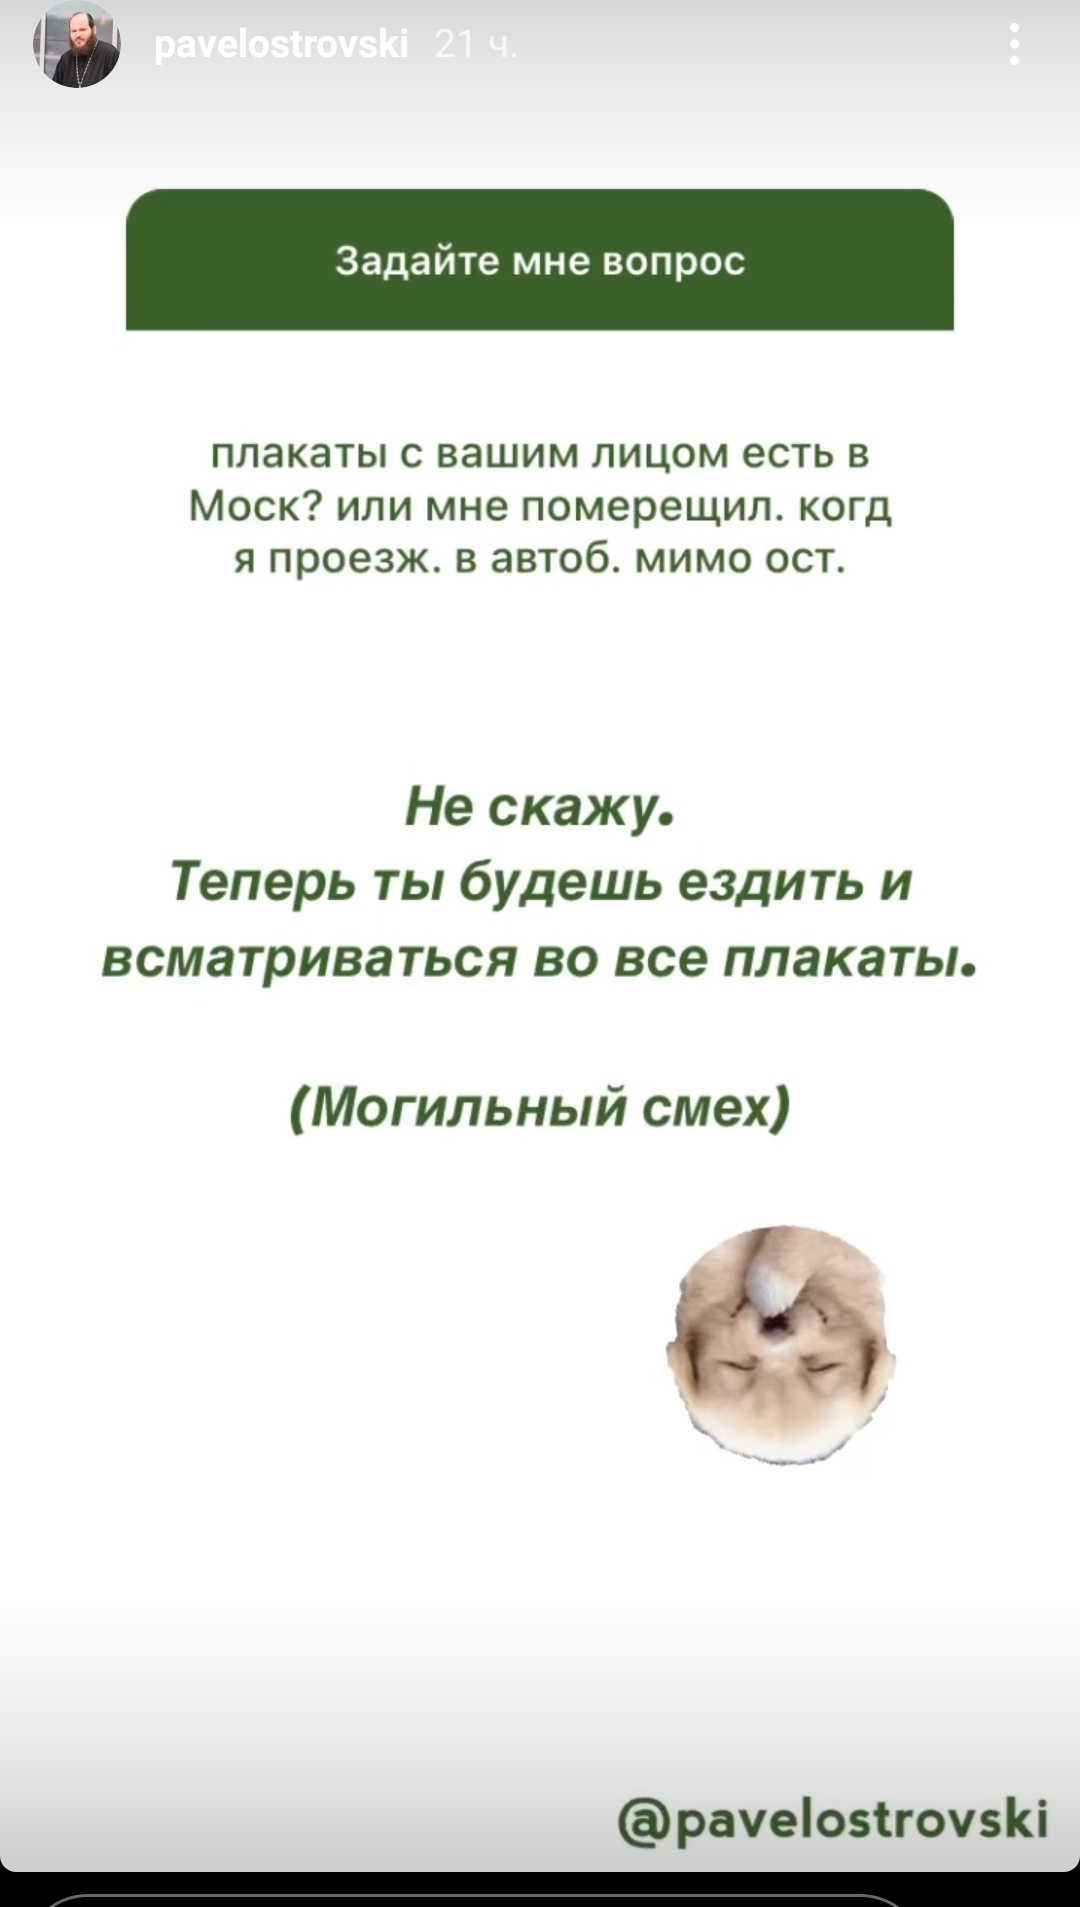 Reply to the post “Humor from an Orthodox priest” - Humor, Priests, Orthodoxy, Instagram, Answer, Reply to post, Longpost, Pavel Ostrovsky